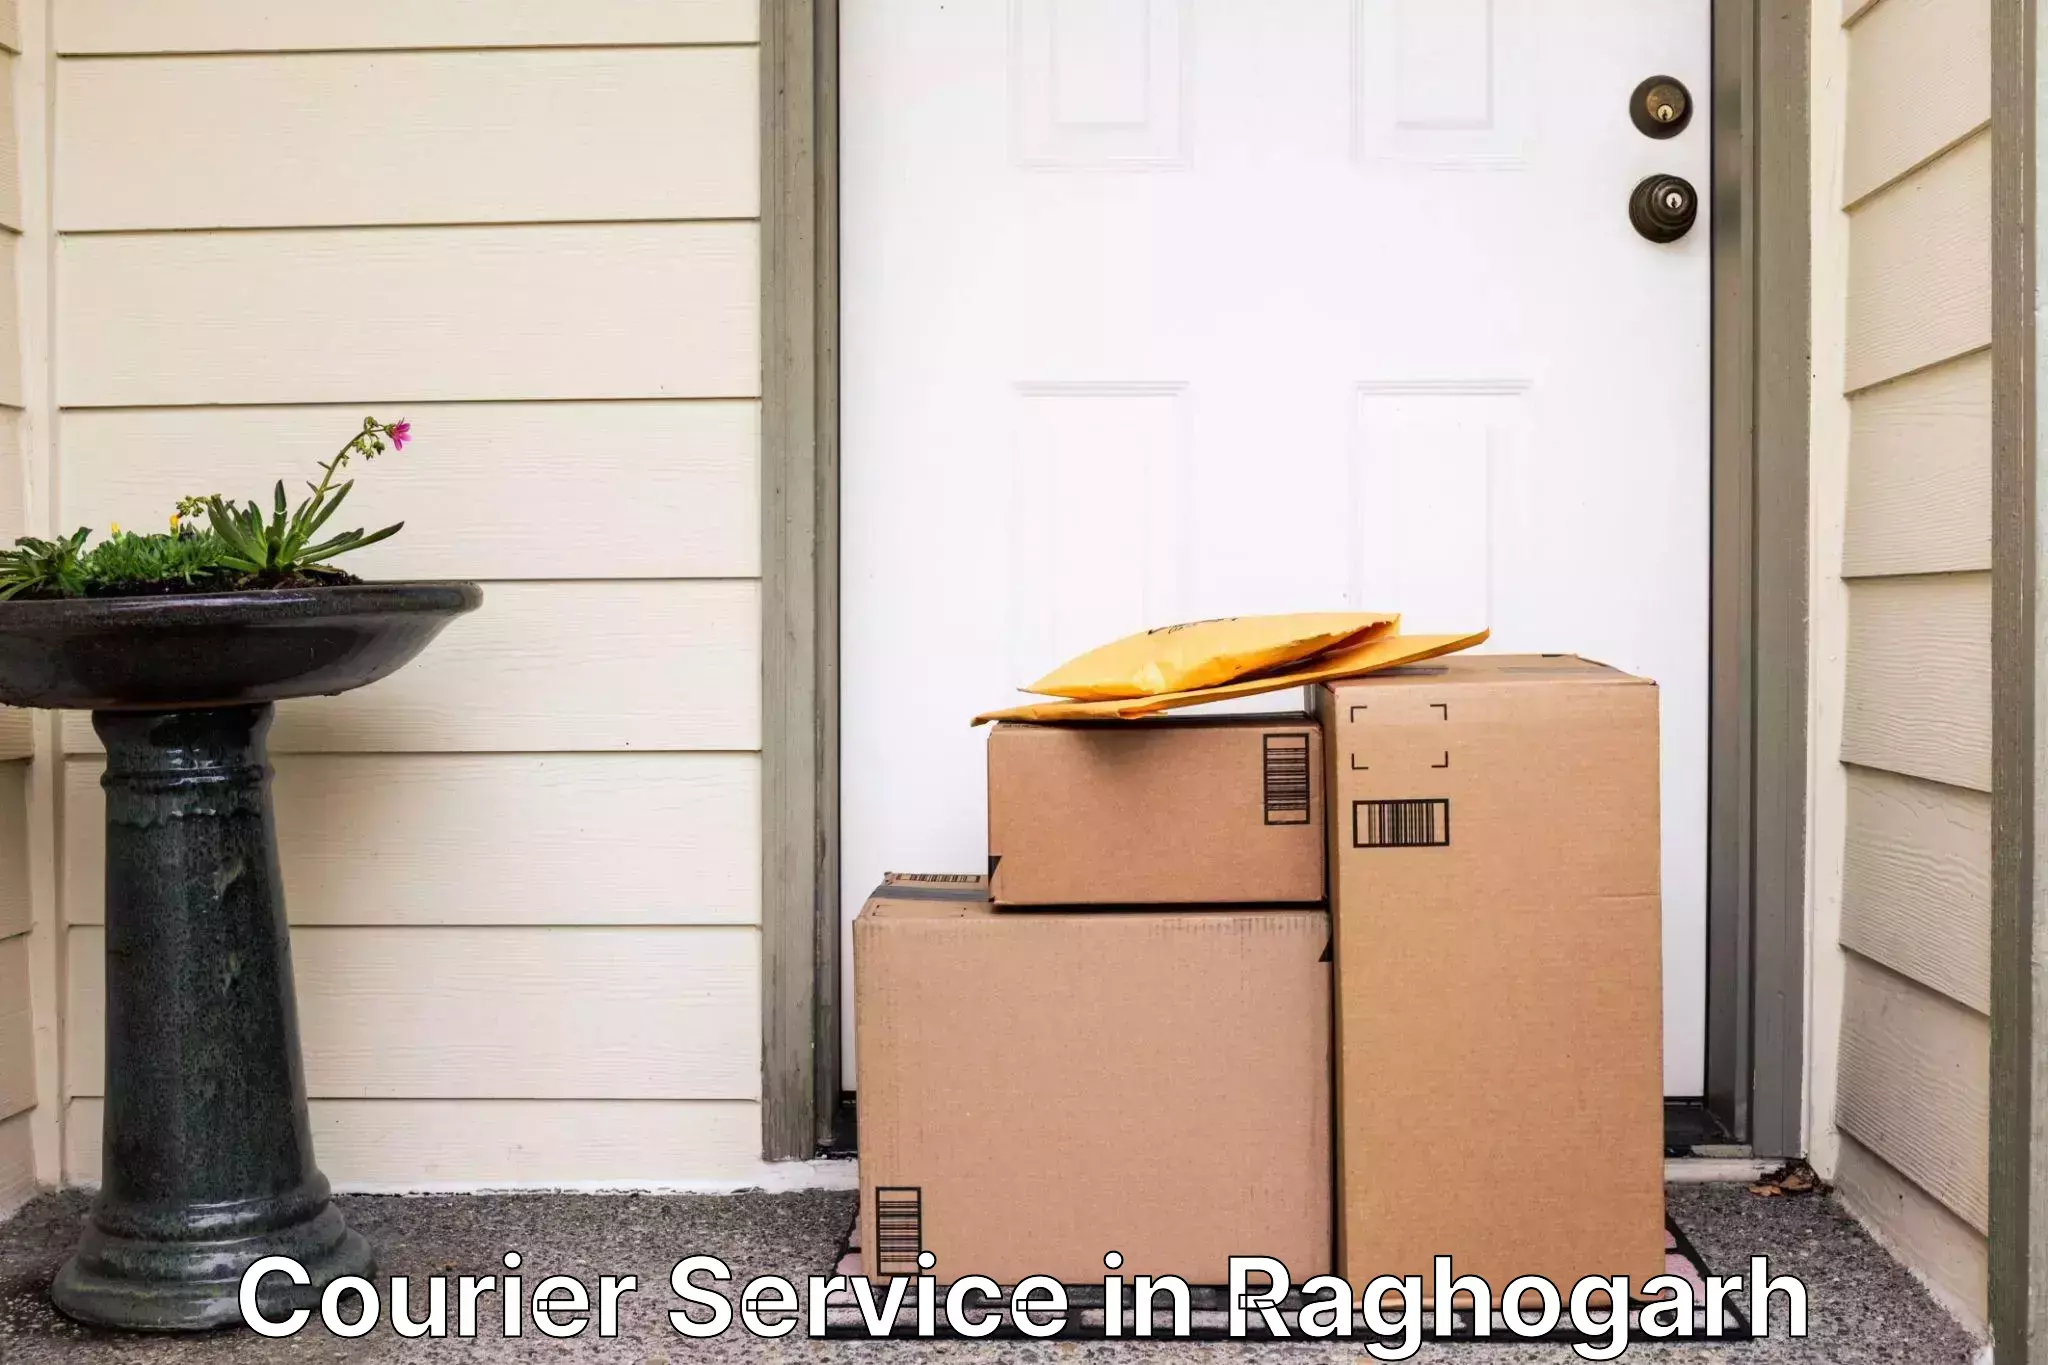 Local delivery service in Raghogarh